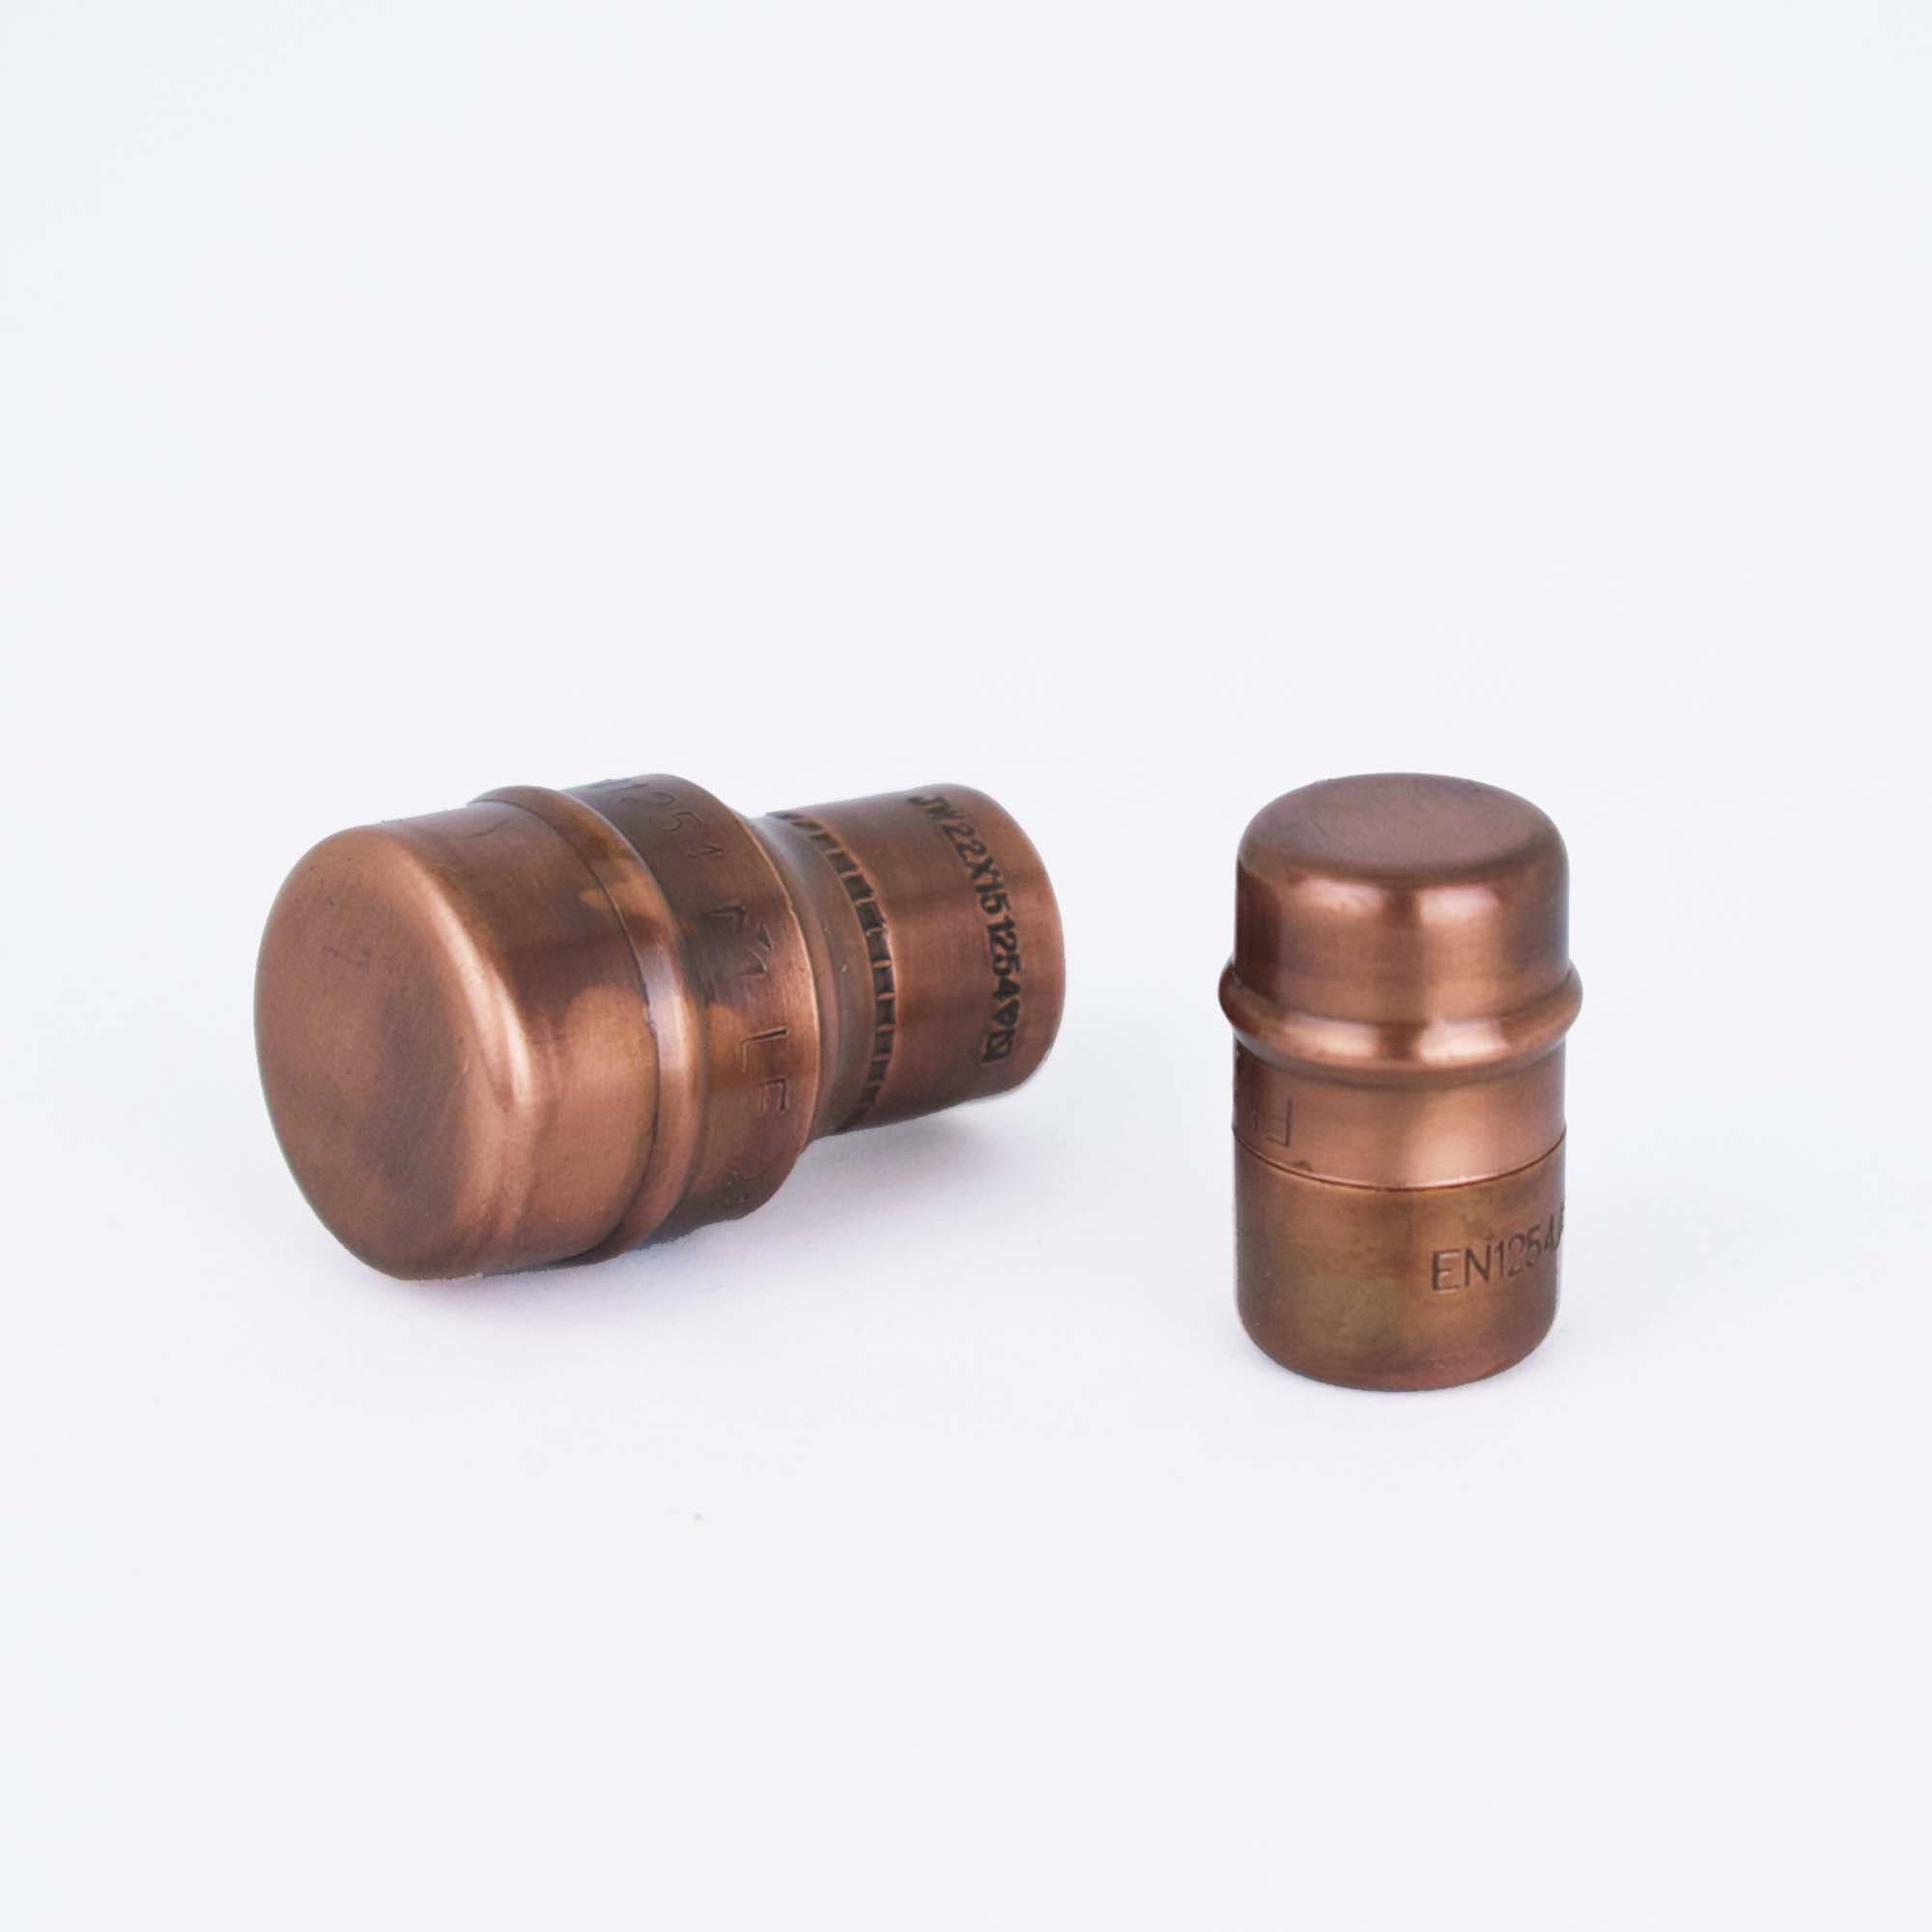 Copper Knob T-shaped - Aged - Two Knobs Side by Side